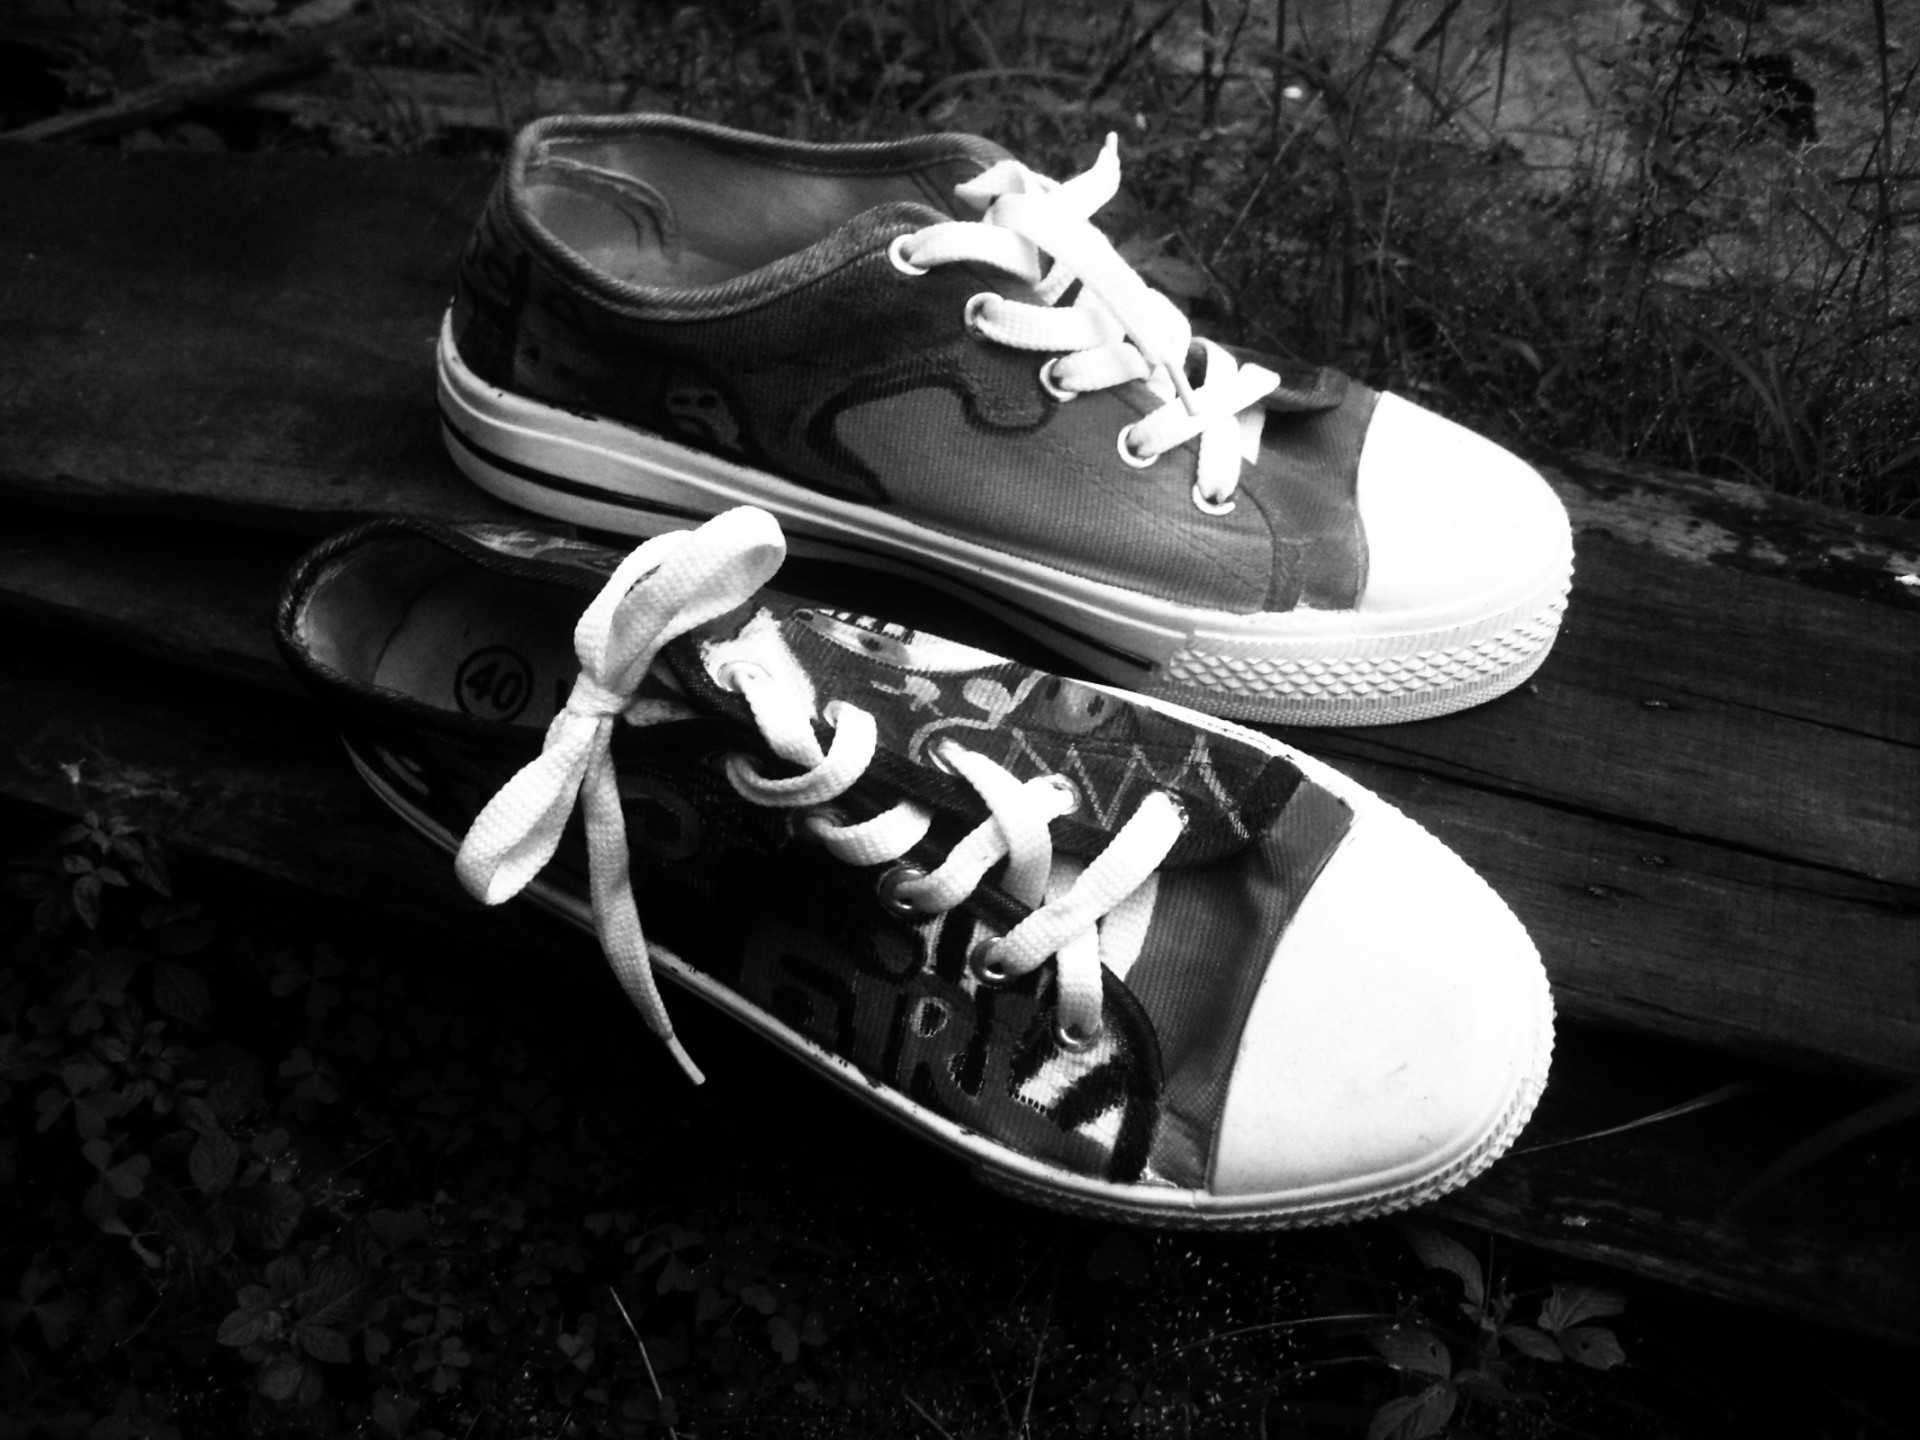 sneakers shoes keds free photo